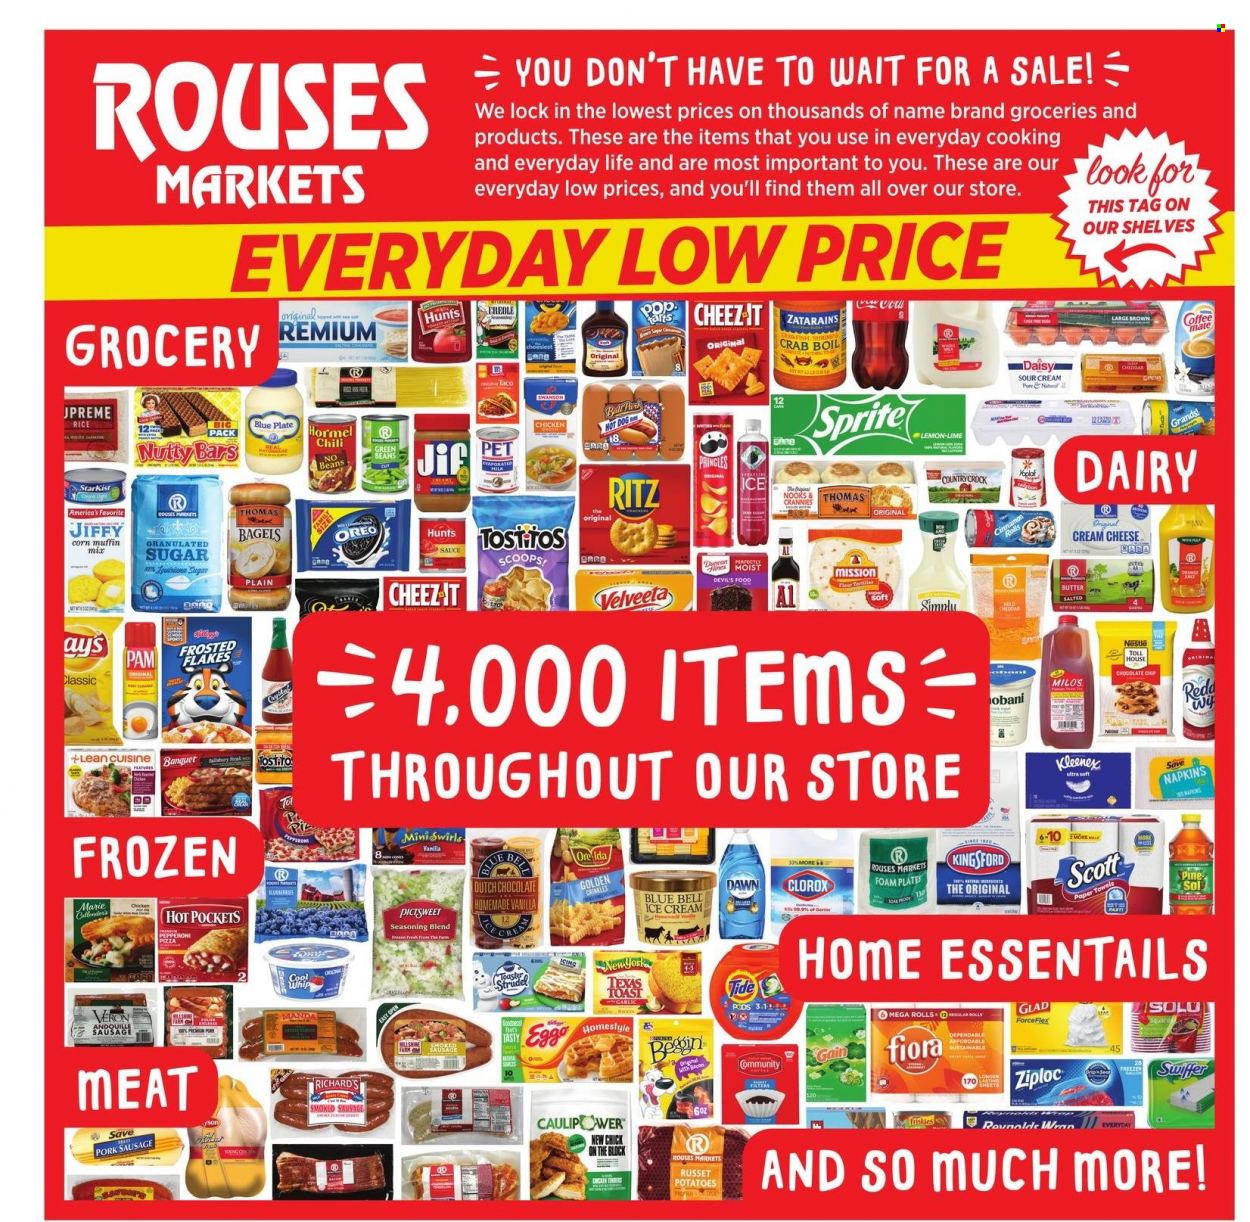 thumbnail - Rouses Markets Flyer - 01/12/2022 - 01/19/2022 - Sales products - bagels, muffin mix, beans, corn, green beans, russet potatoes, potatoes, crab, StarKist, hot dog, Lean Cuisine, Hormel, sausage, pork sausage, cheese, Oreo, eggs, butter, Cool Whip, ice cream, Blue Bell, Nestlé, chocolate chips, RITZ, Pringles, granulated sugar, sugar, corn muffin, Frosted Flakes, rice, spice, Jif, Sprite, L'Or, napkins, Kleenex, Scott, kitchen towels, paper towels, Gain, Clorox, Pine-Sol, Ziploc, foam plates, Friskies, Jiffy. Page 9.